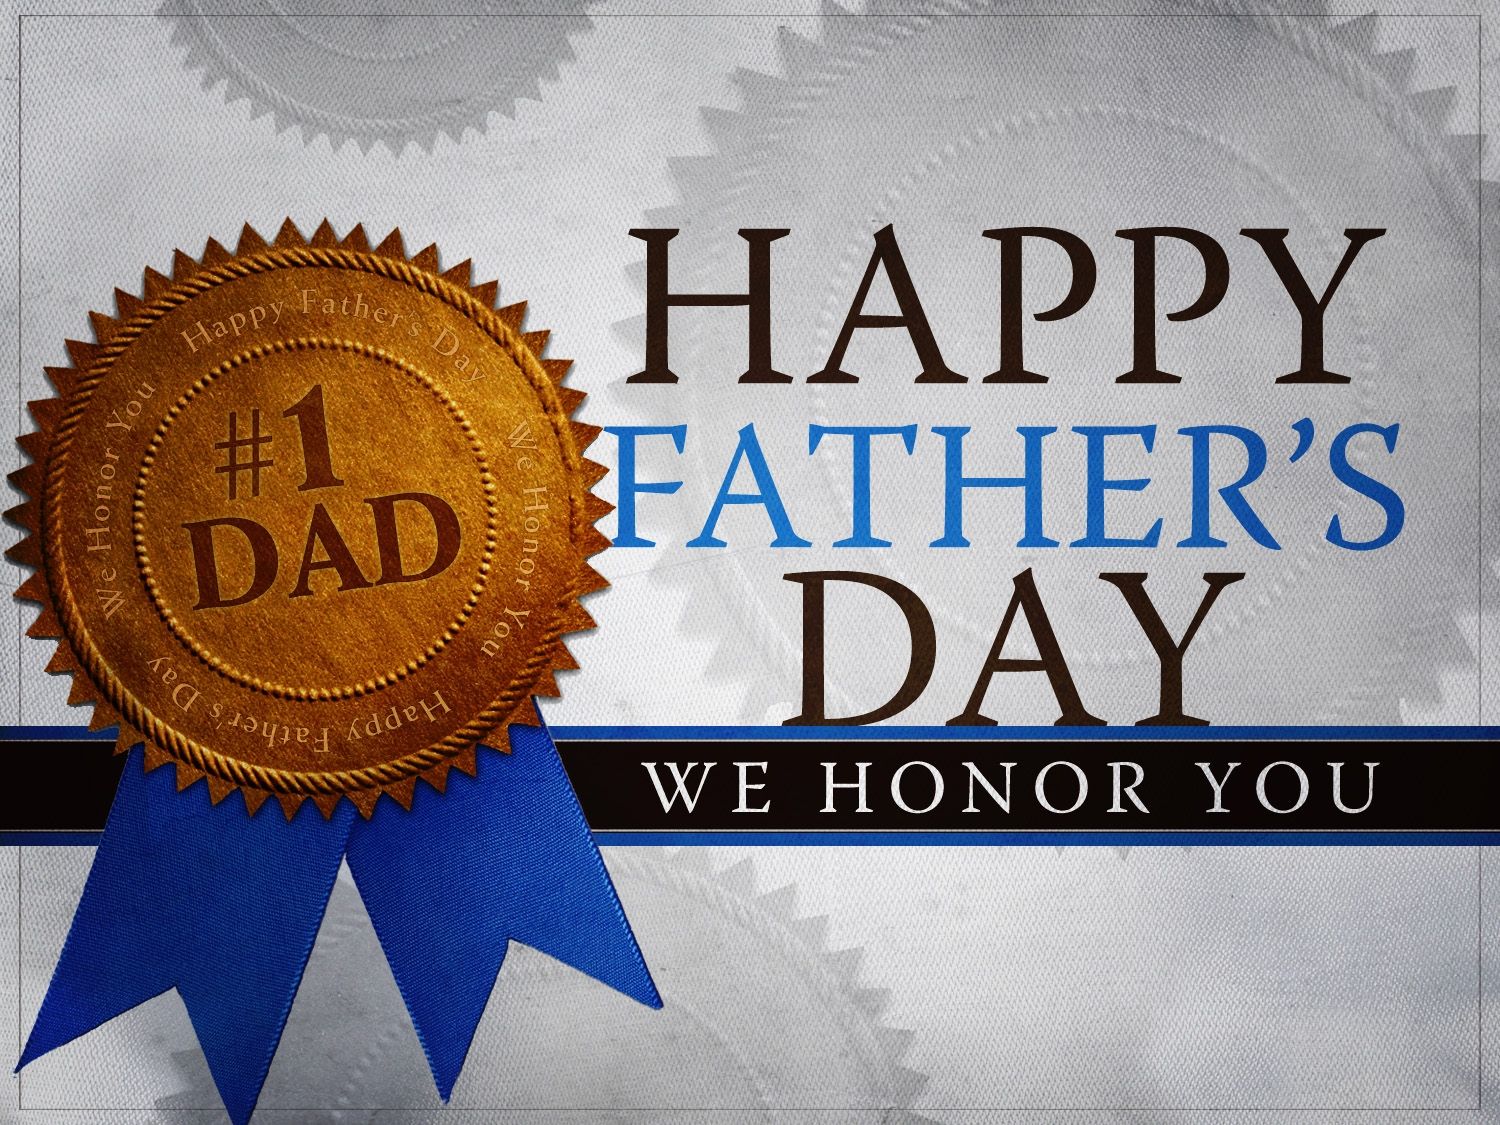 Happy Fathers Day Message Place